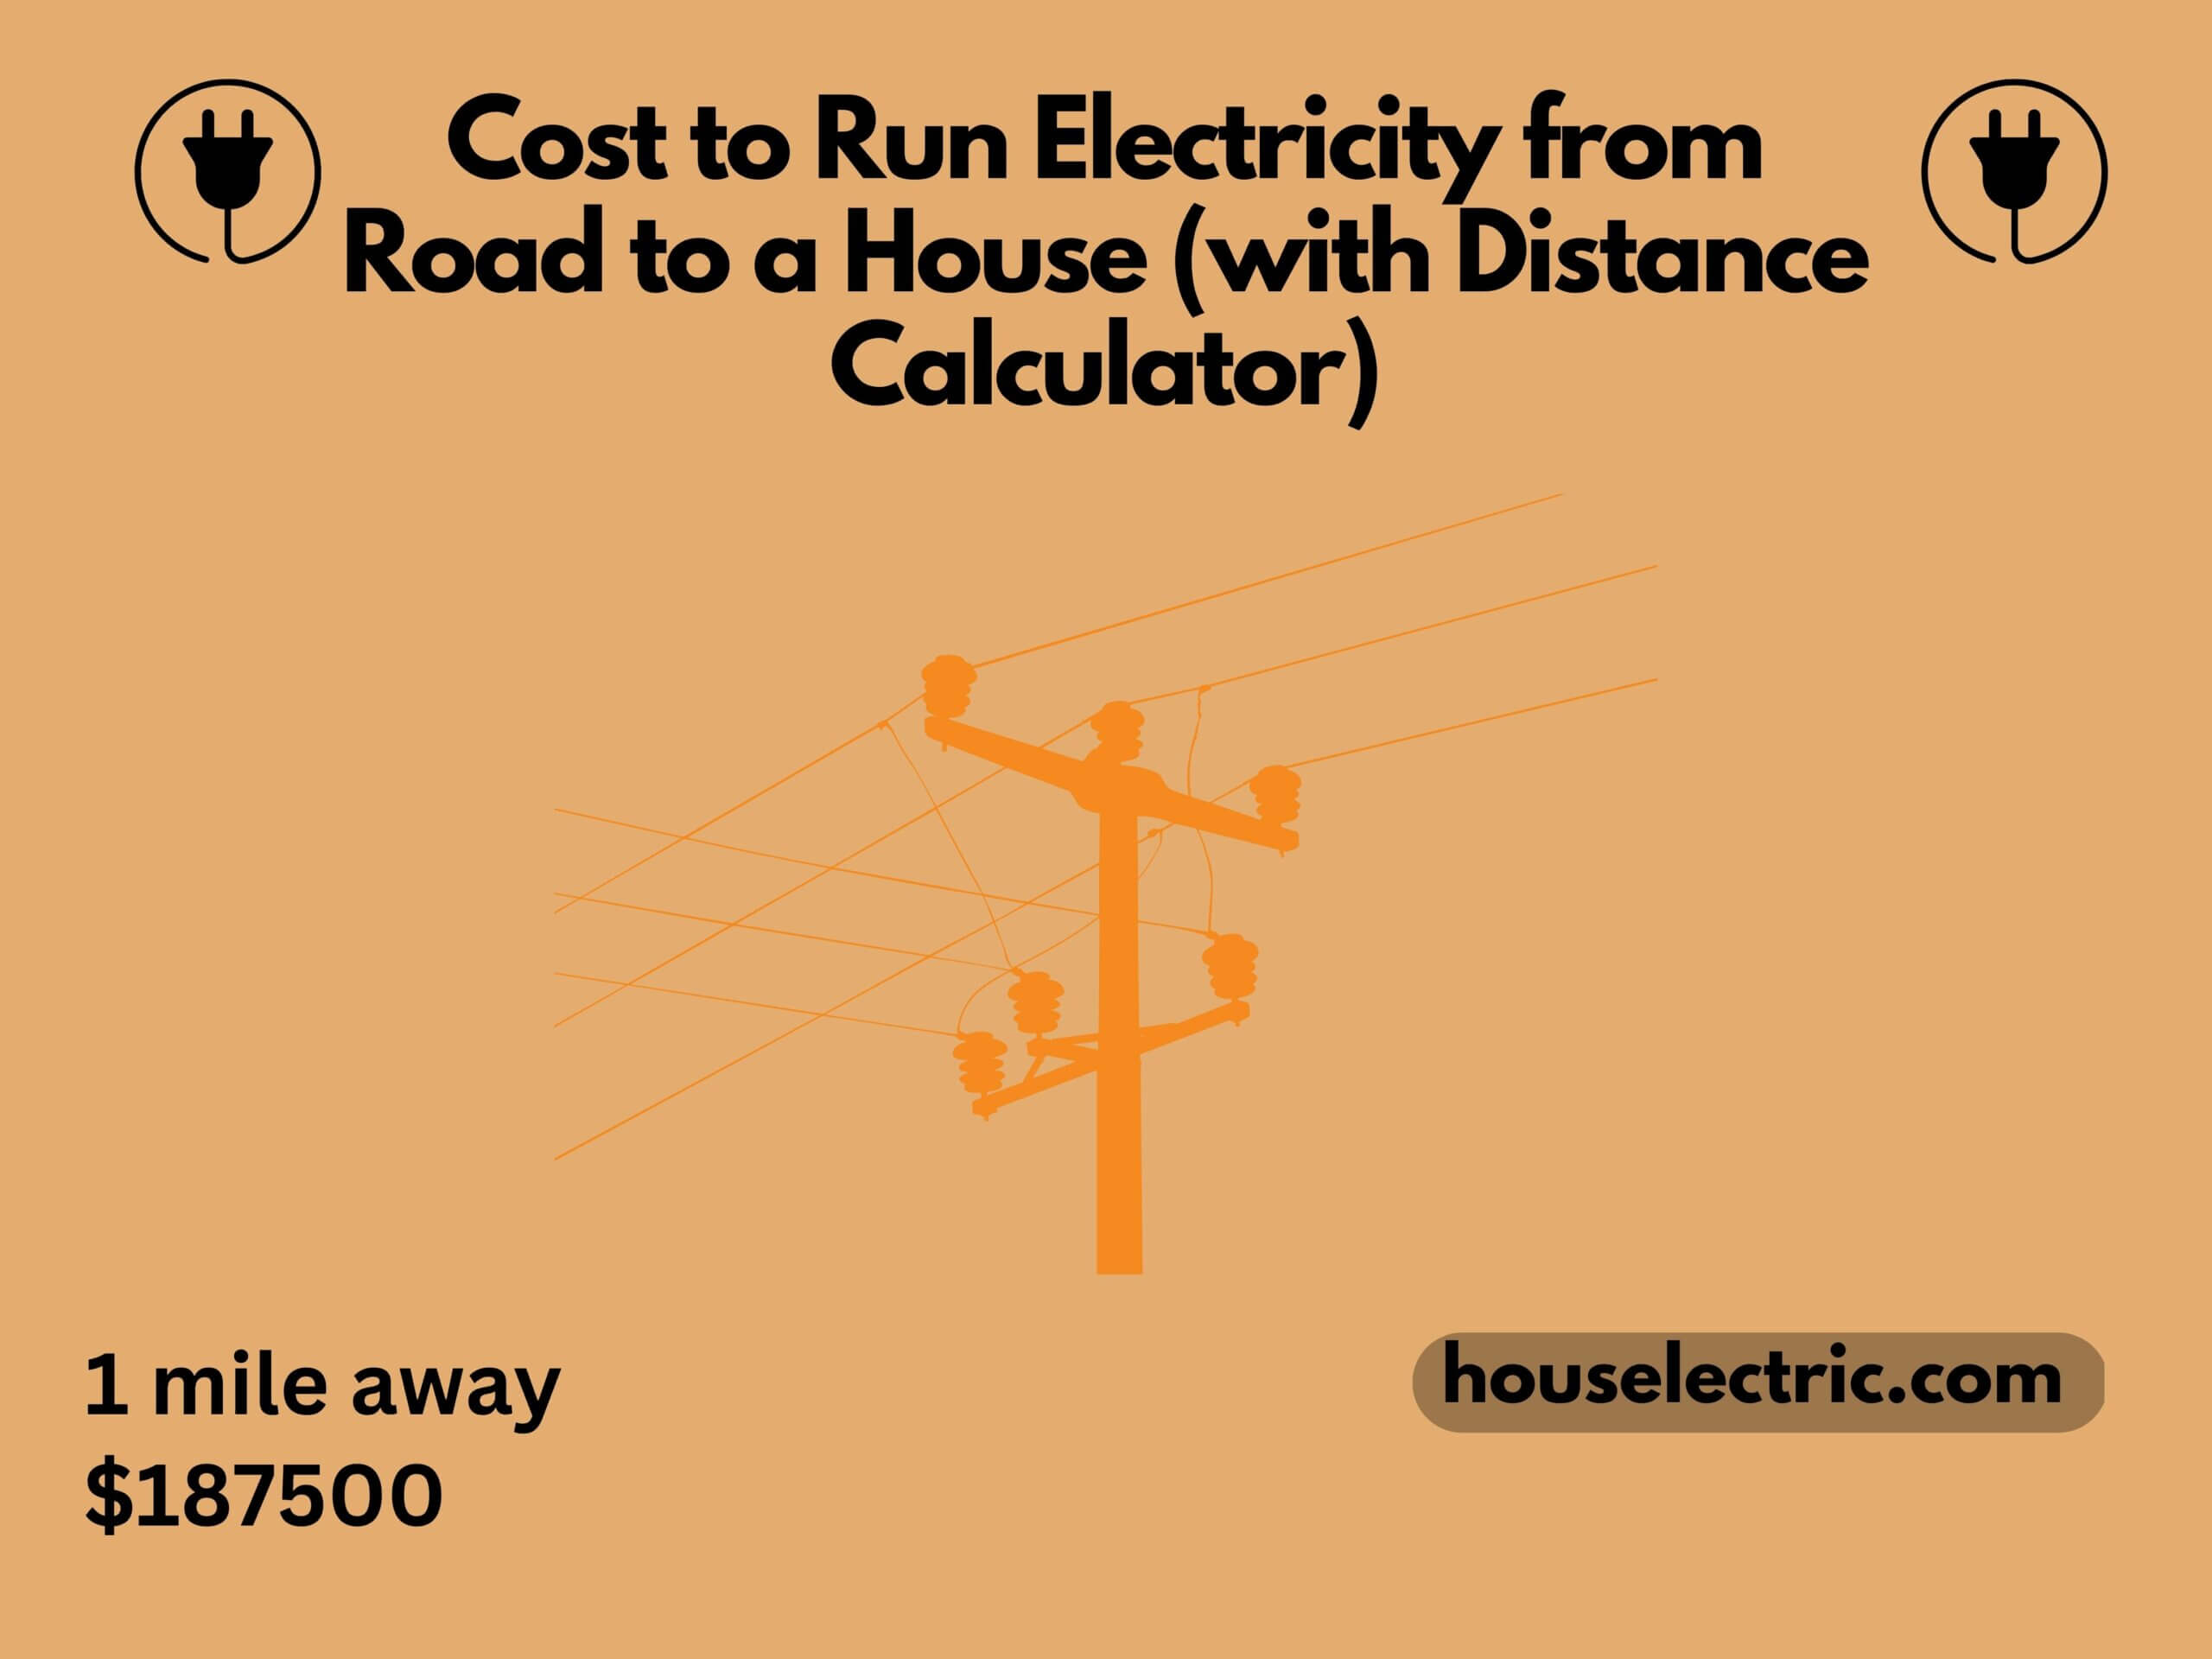 Cost to run electricity from road to a house